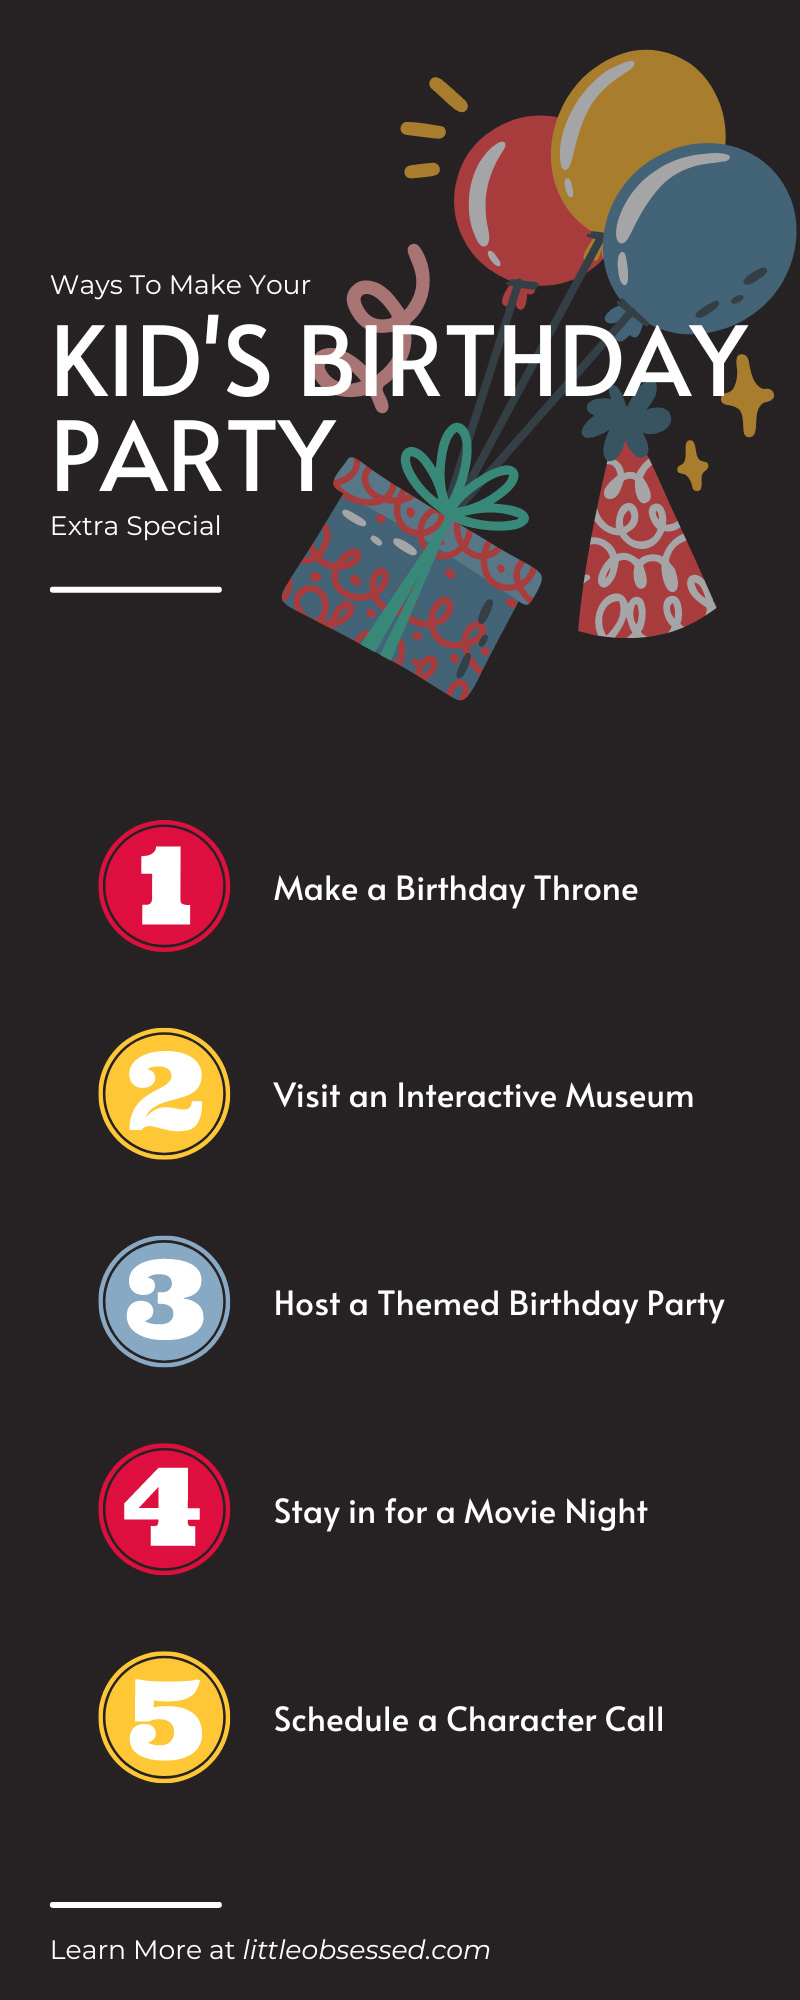 10 Ways To Make Your Kids’ Birthday Party Extra Special